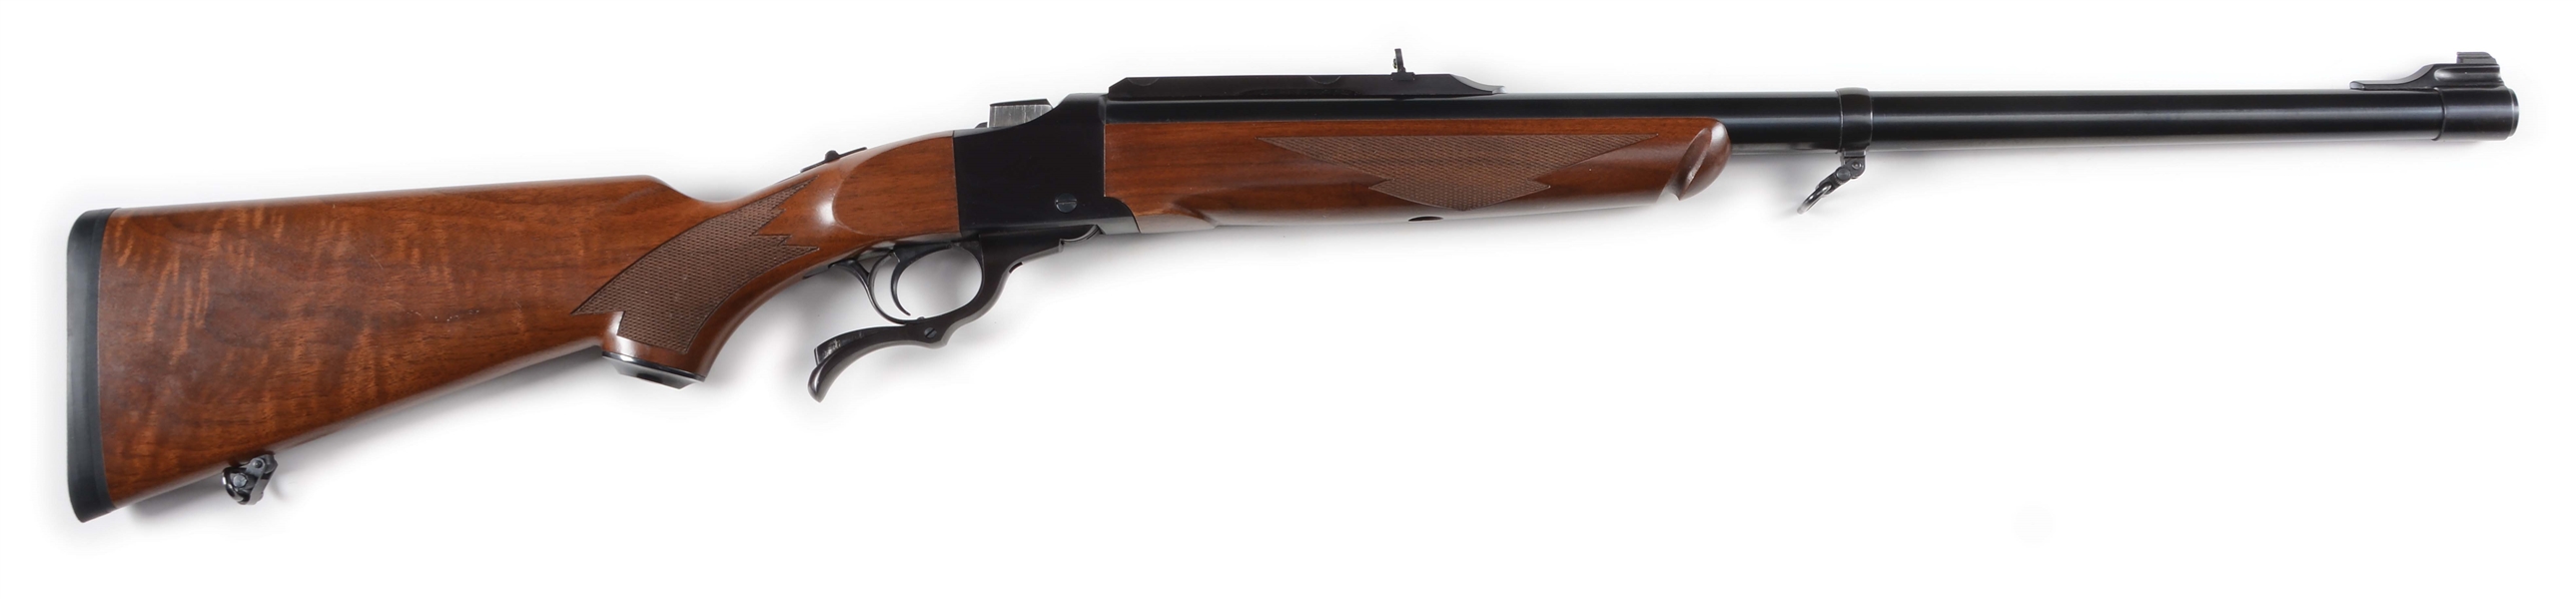 (M) RUGER NO. 1 .458 WINCHESTER MAGNUM FALLING BLOCK RIFLE.